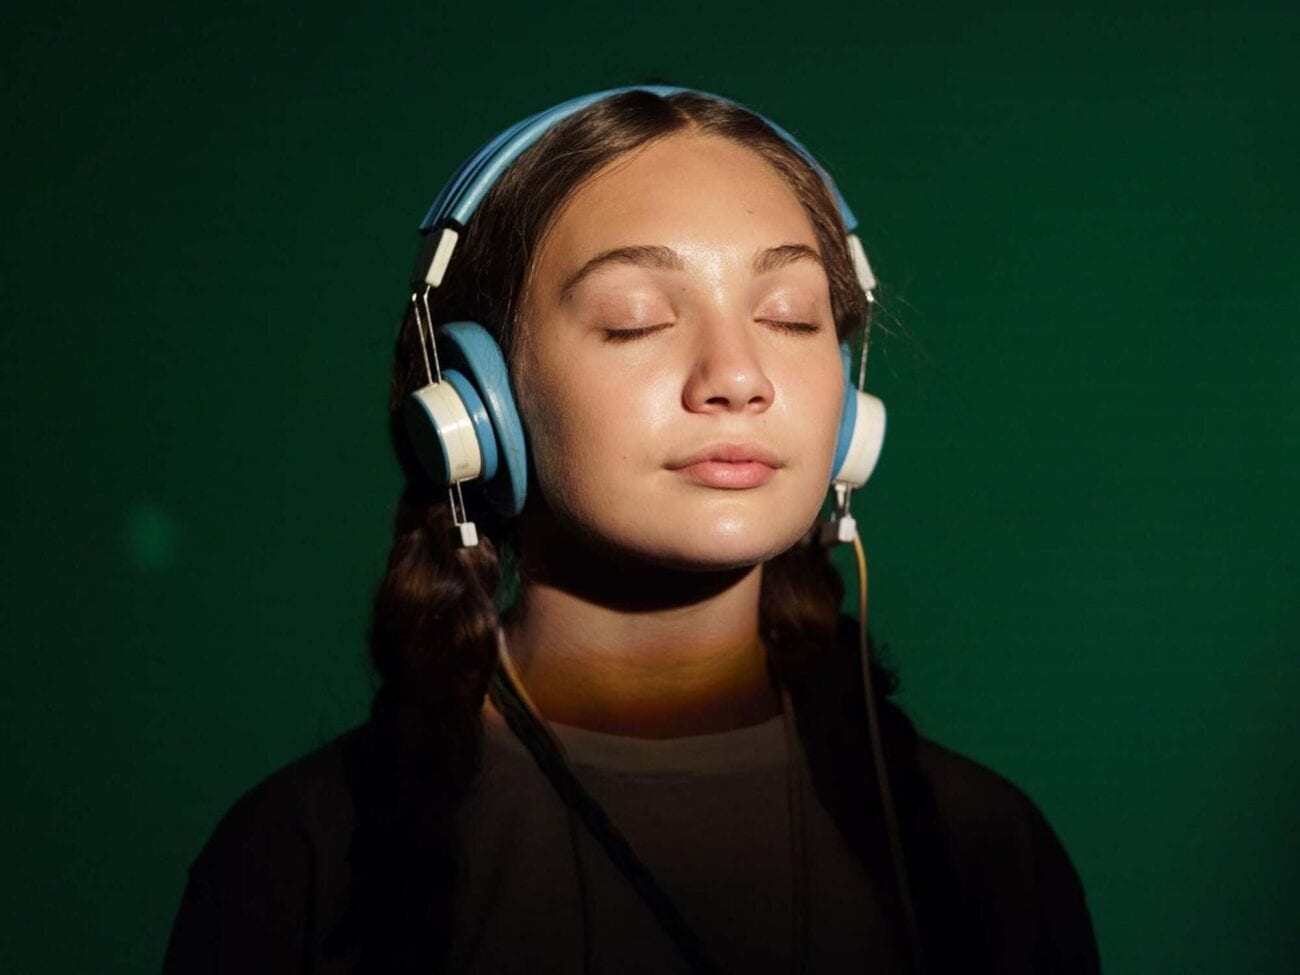 Sia and Maddie Ziegler are in hot water for their controversial film 'Music'. Here's everything the Autistic community had to say about the film.